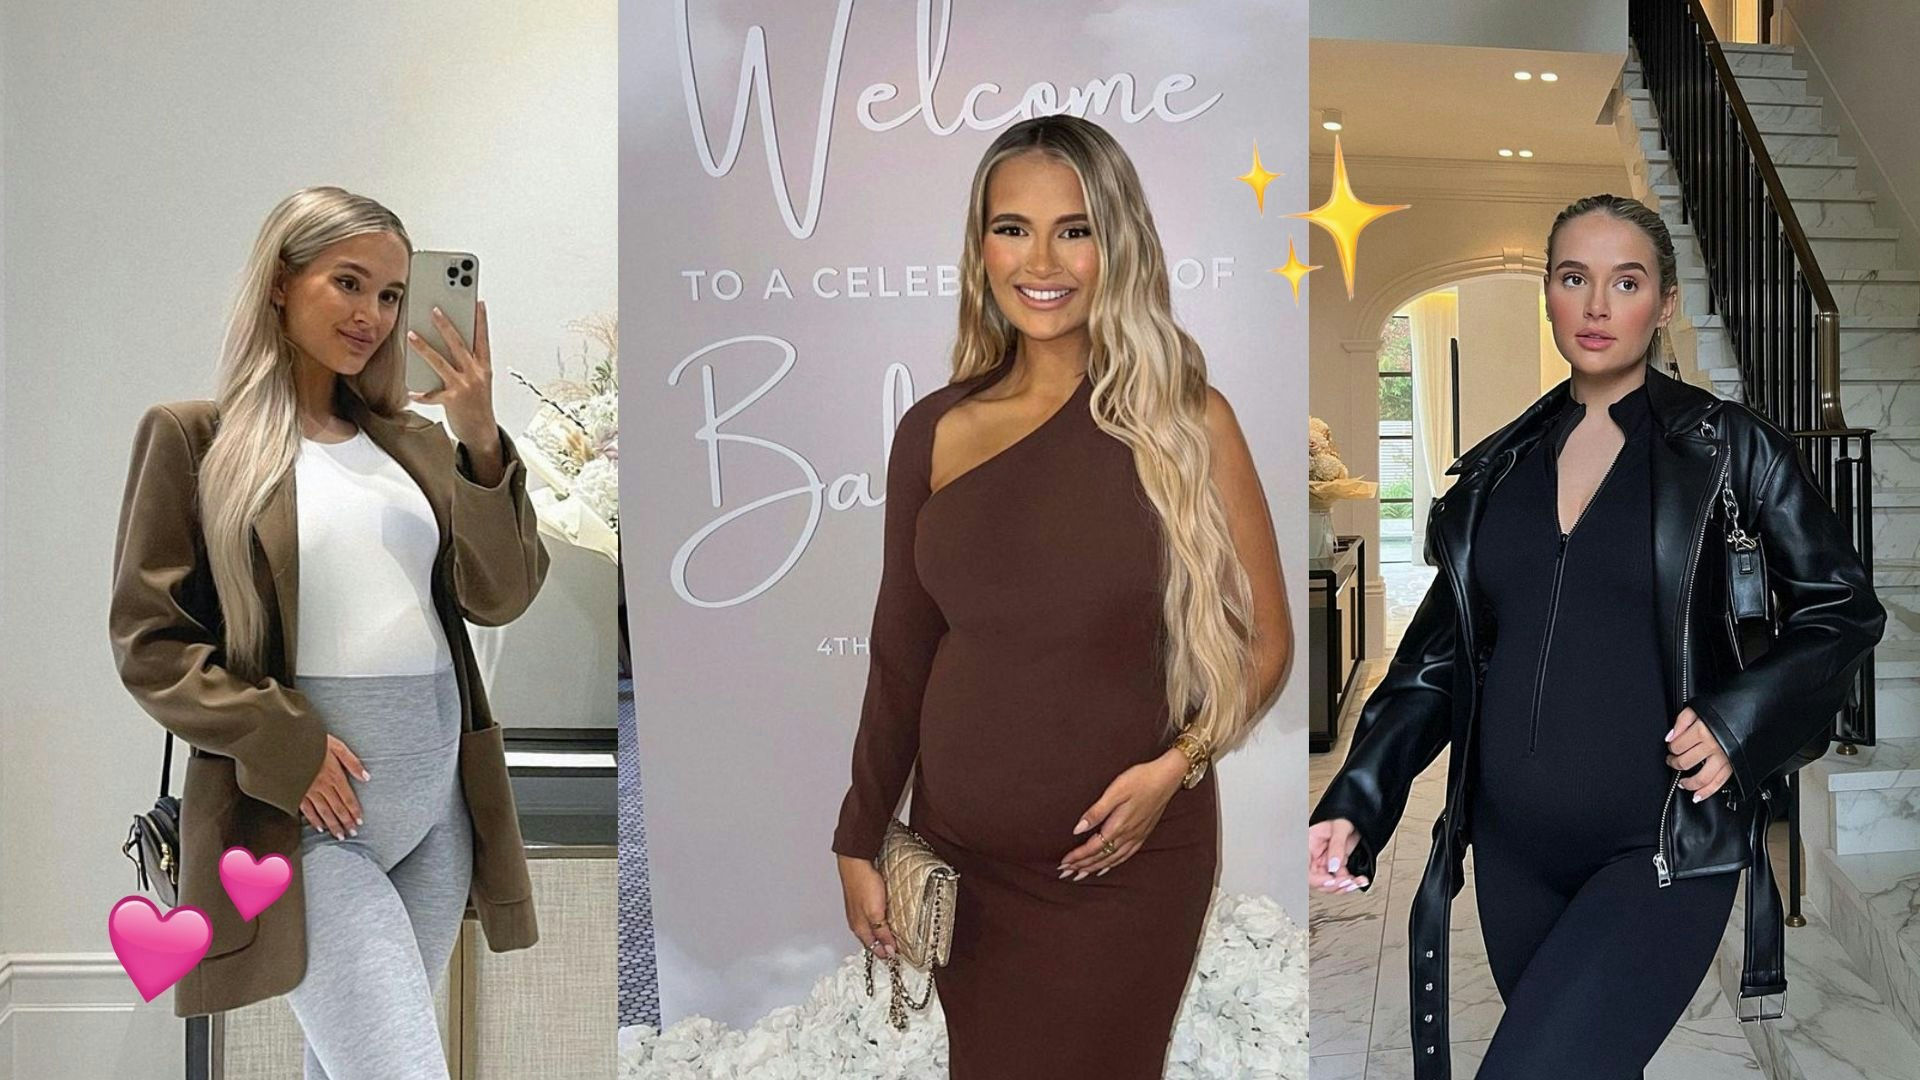 Pregnant Love Island star Molly-Mae Hague shares baby shower plans